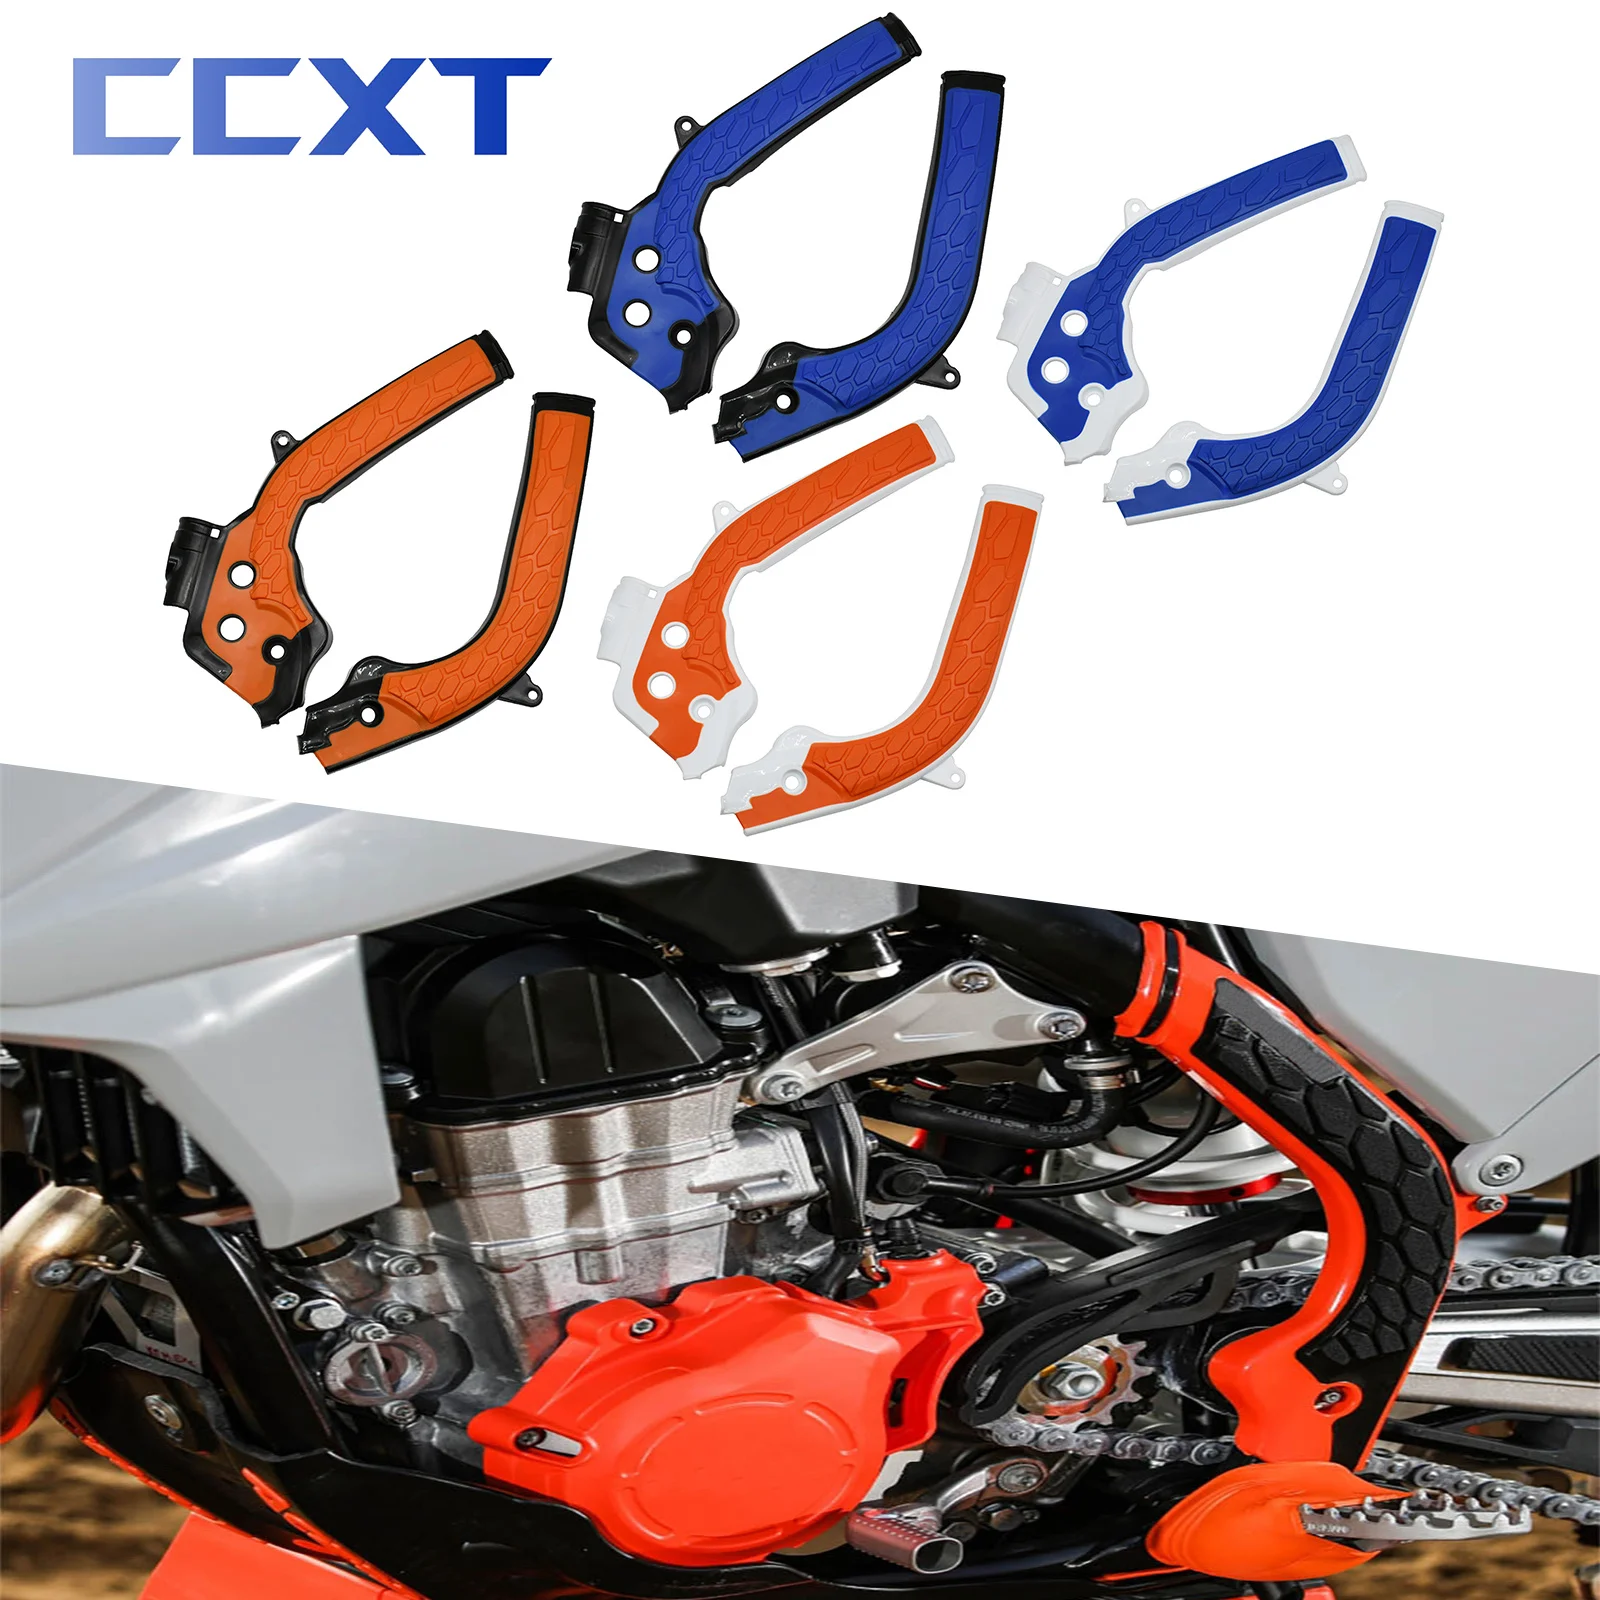 

Motocross Frame Guard X-Grip Protection Cover For KTM SX SXF XC XCW EXC EXCF XCF 125-500 For Husqvarna TC TE FC FE TX Universal